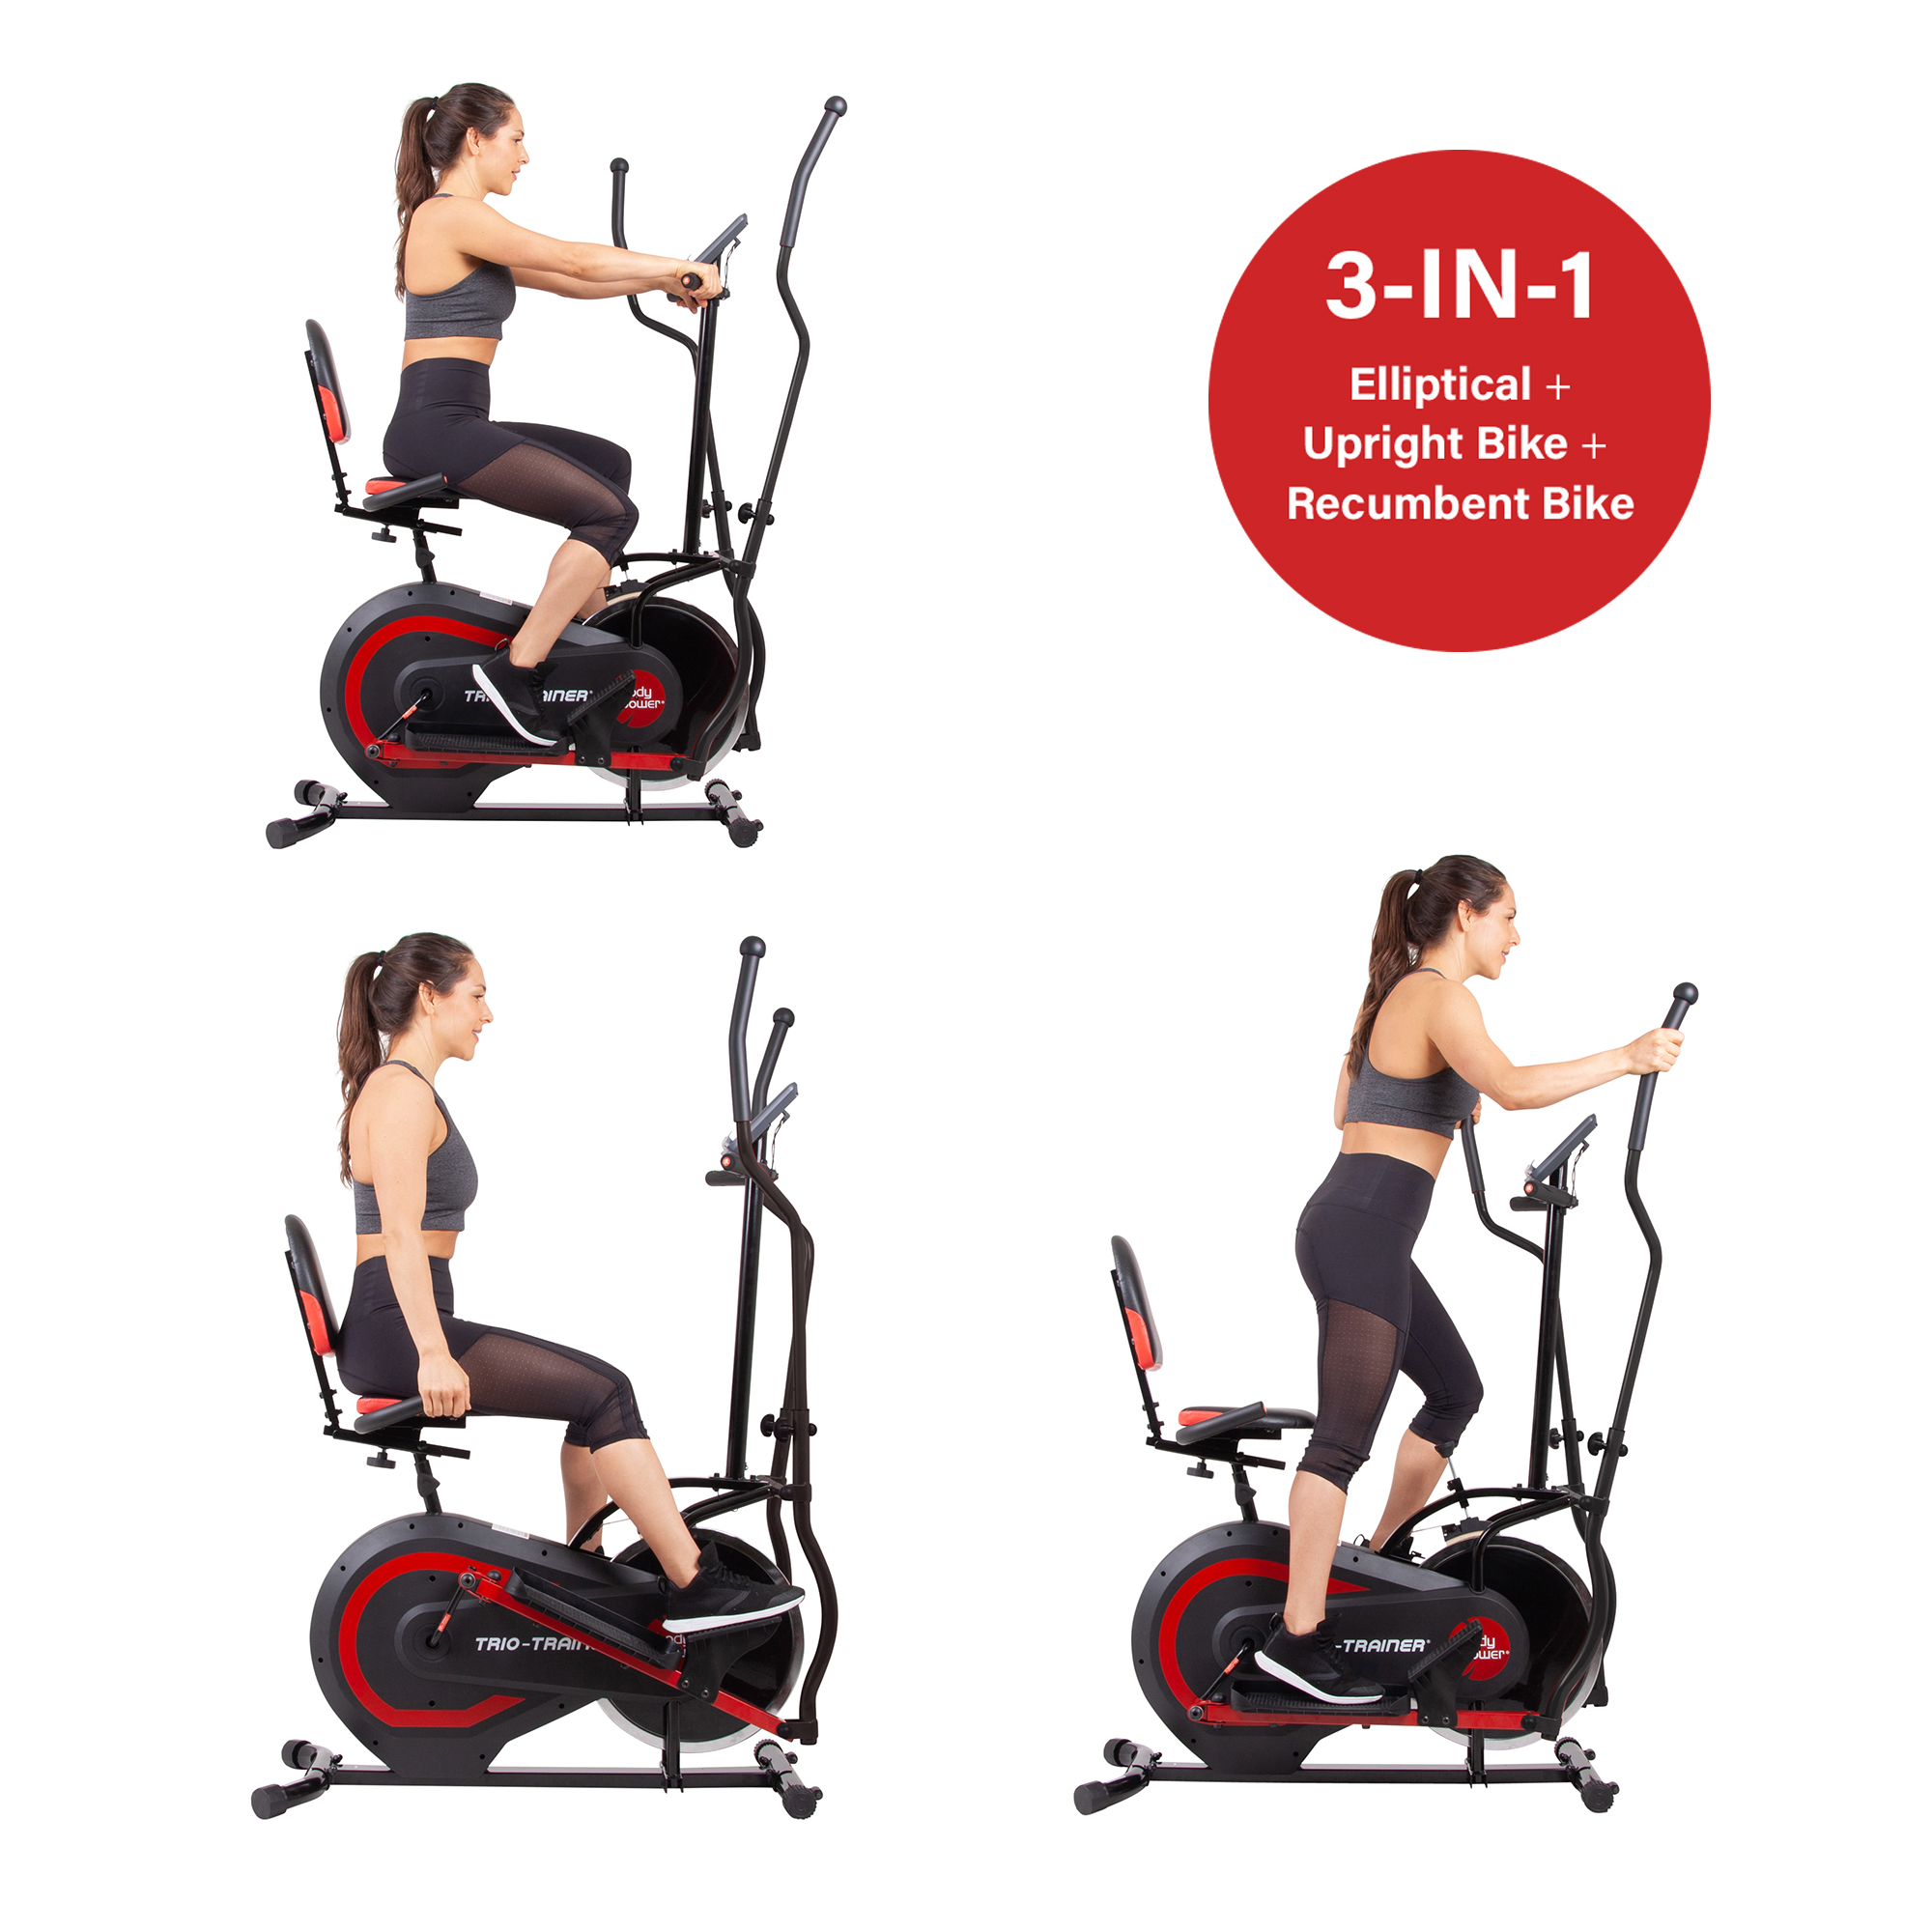 Body Flex Sports 3 in 1 Trio Trainer Home Gym Cardio Exercise Fitness Machine - image 2 of 8